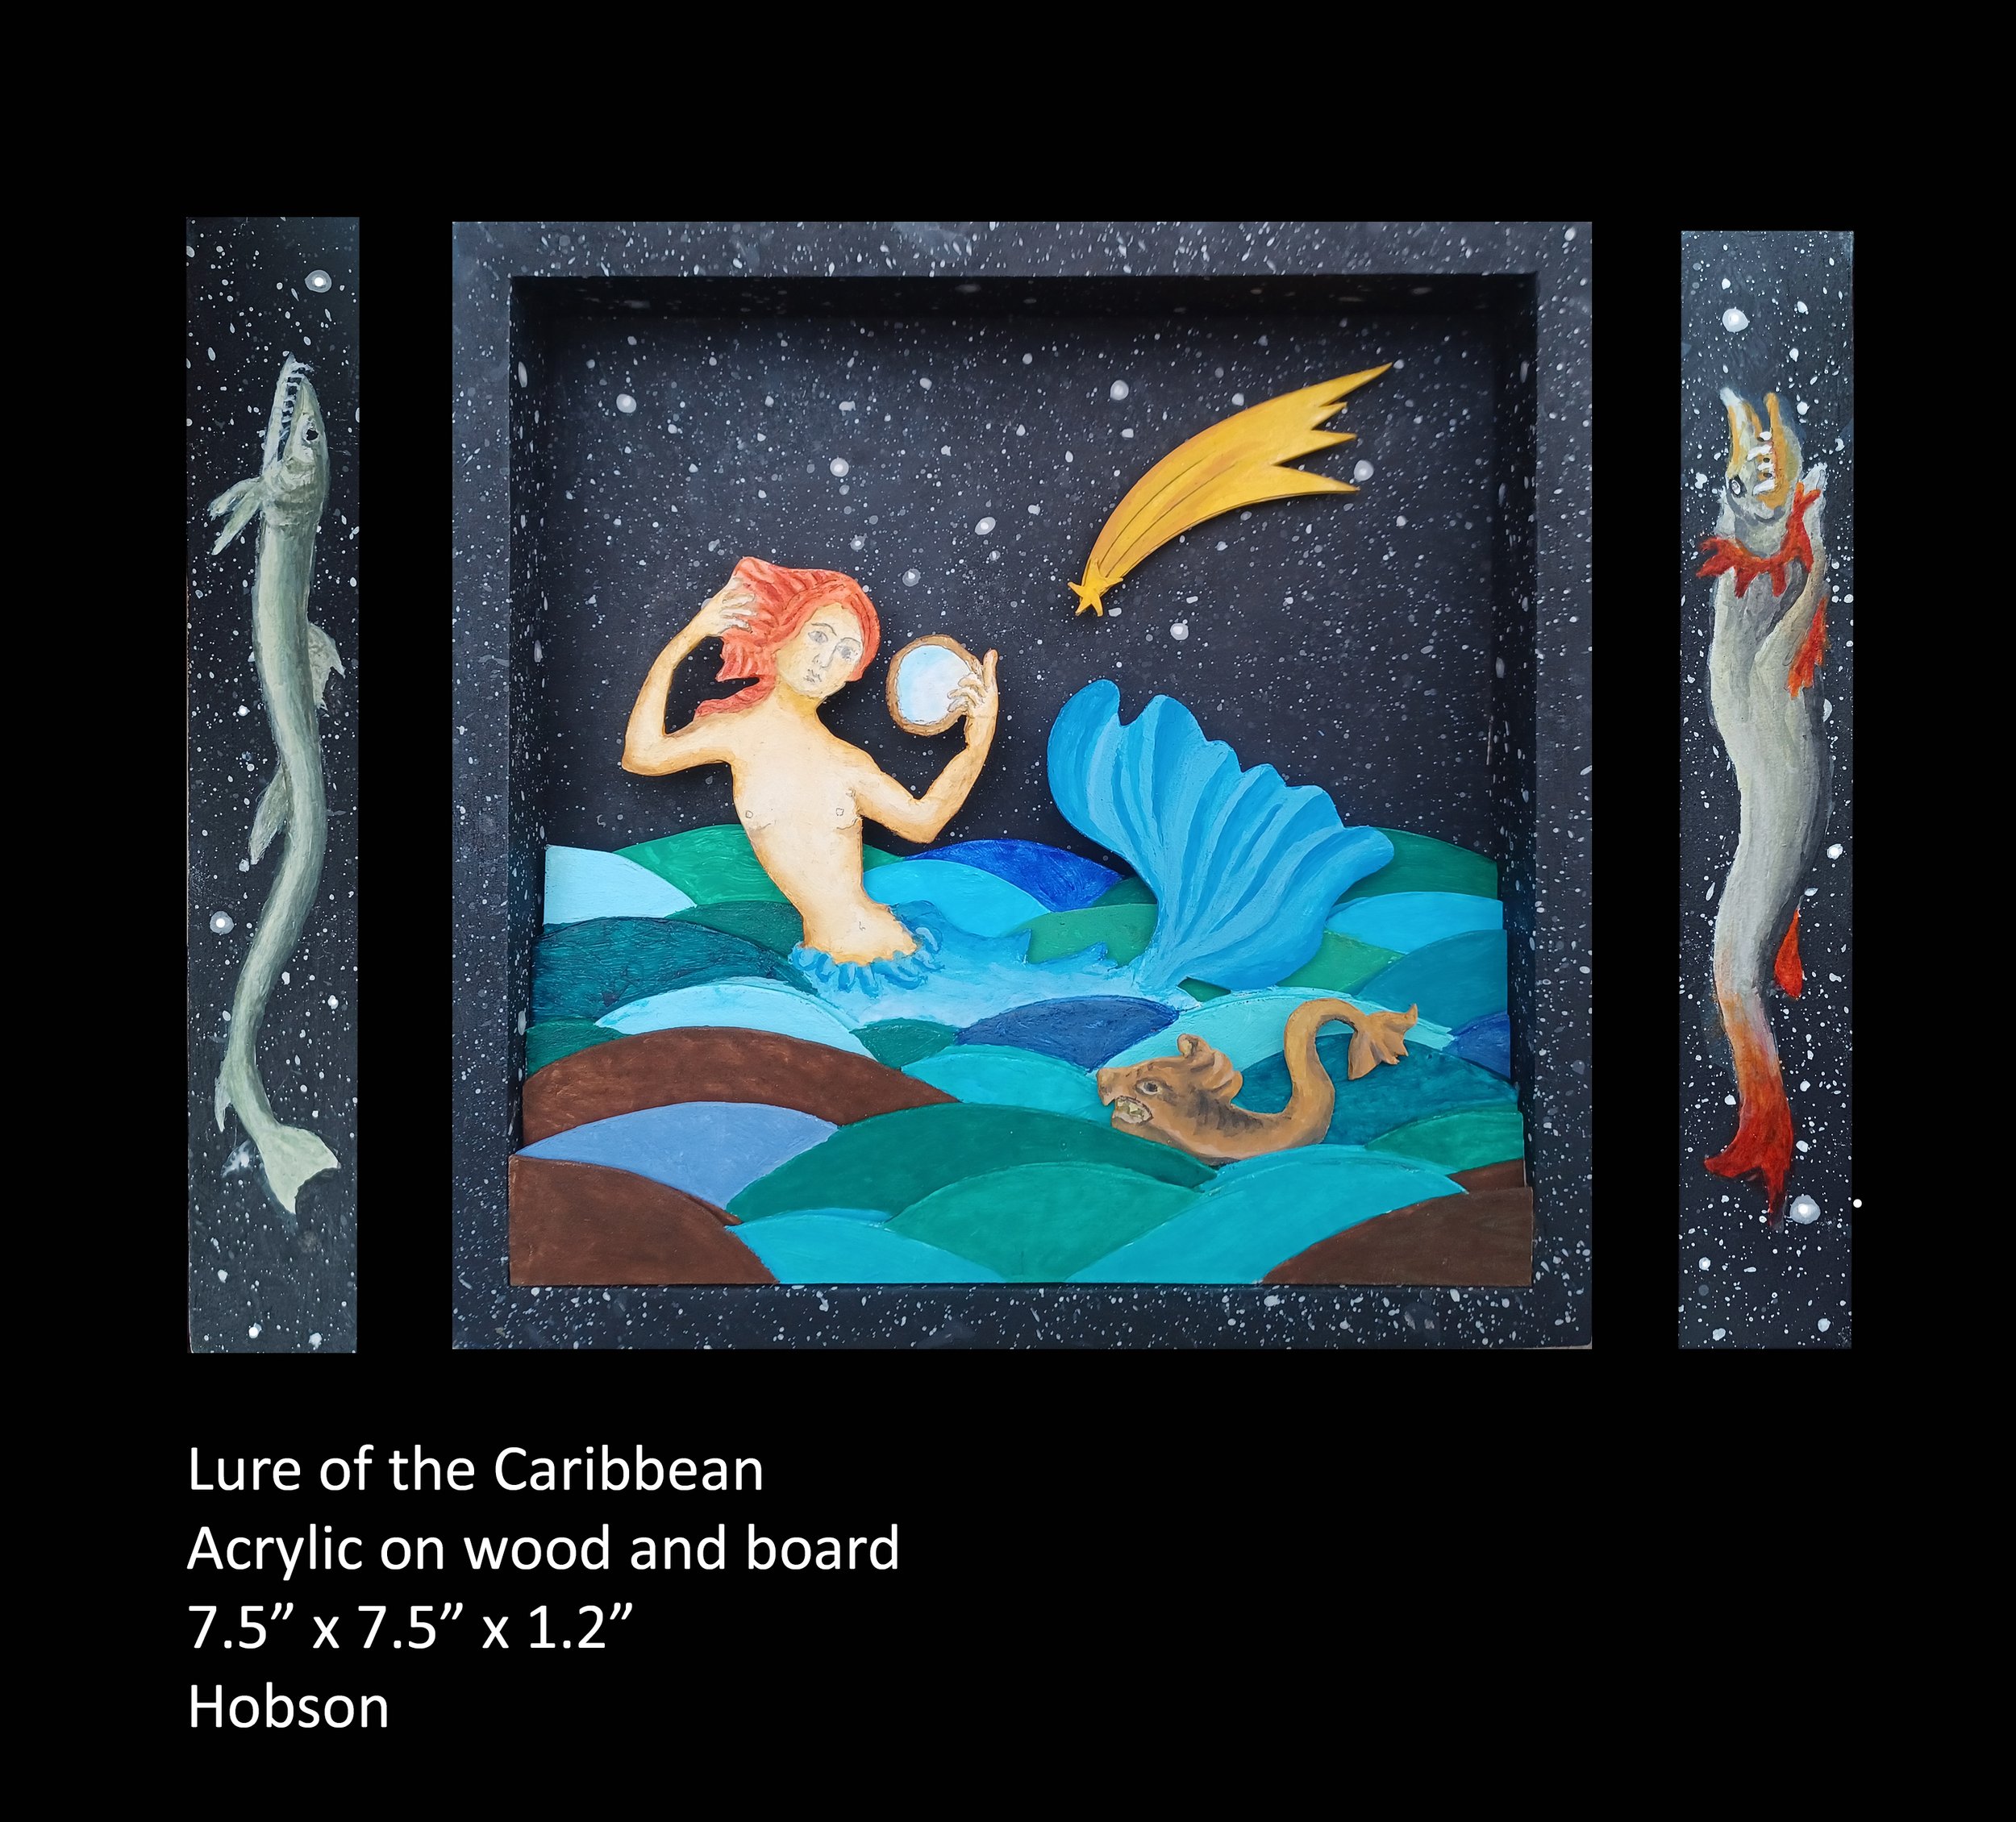 Lure of the Caribbean